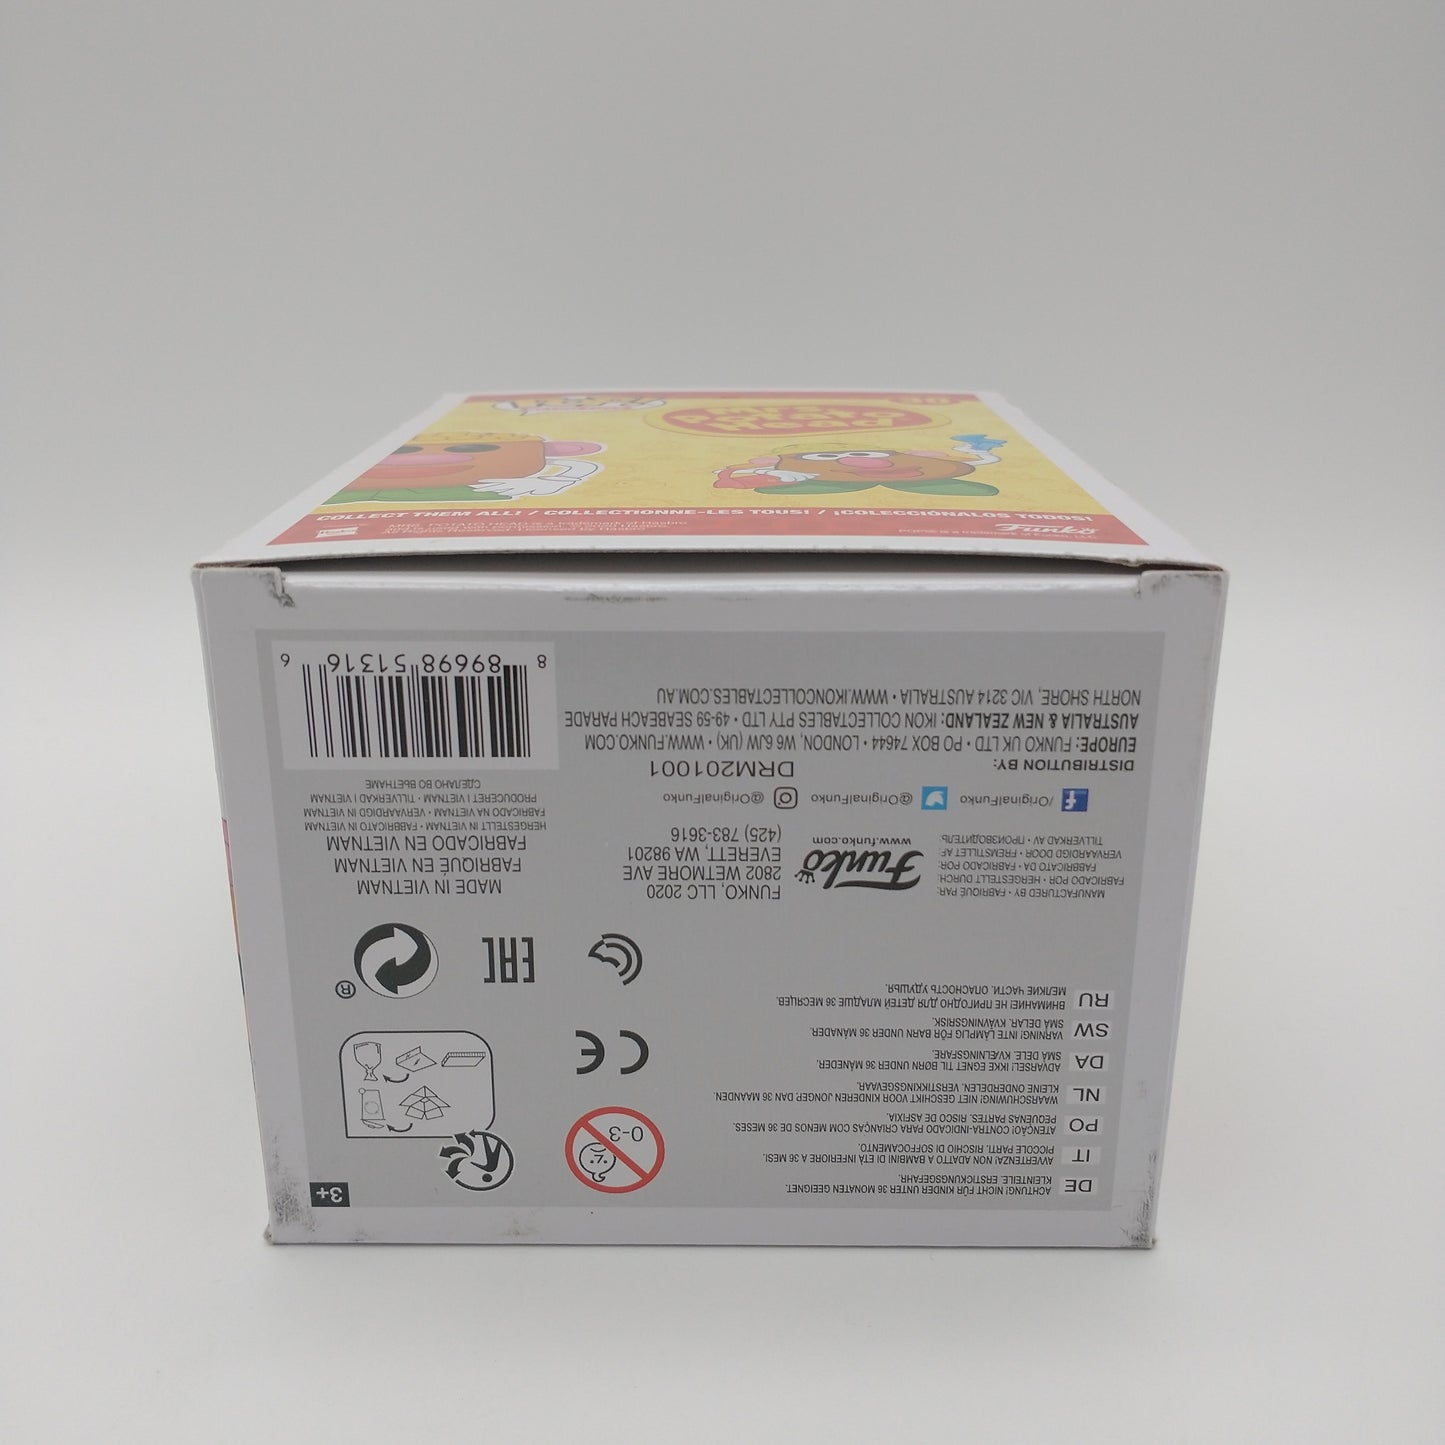 The bottom of the box with the barcode